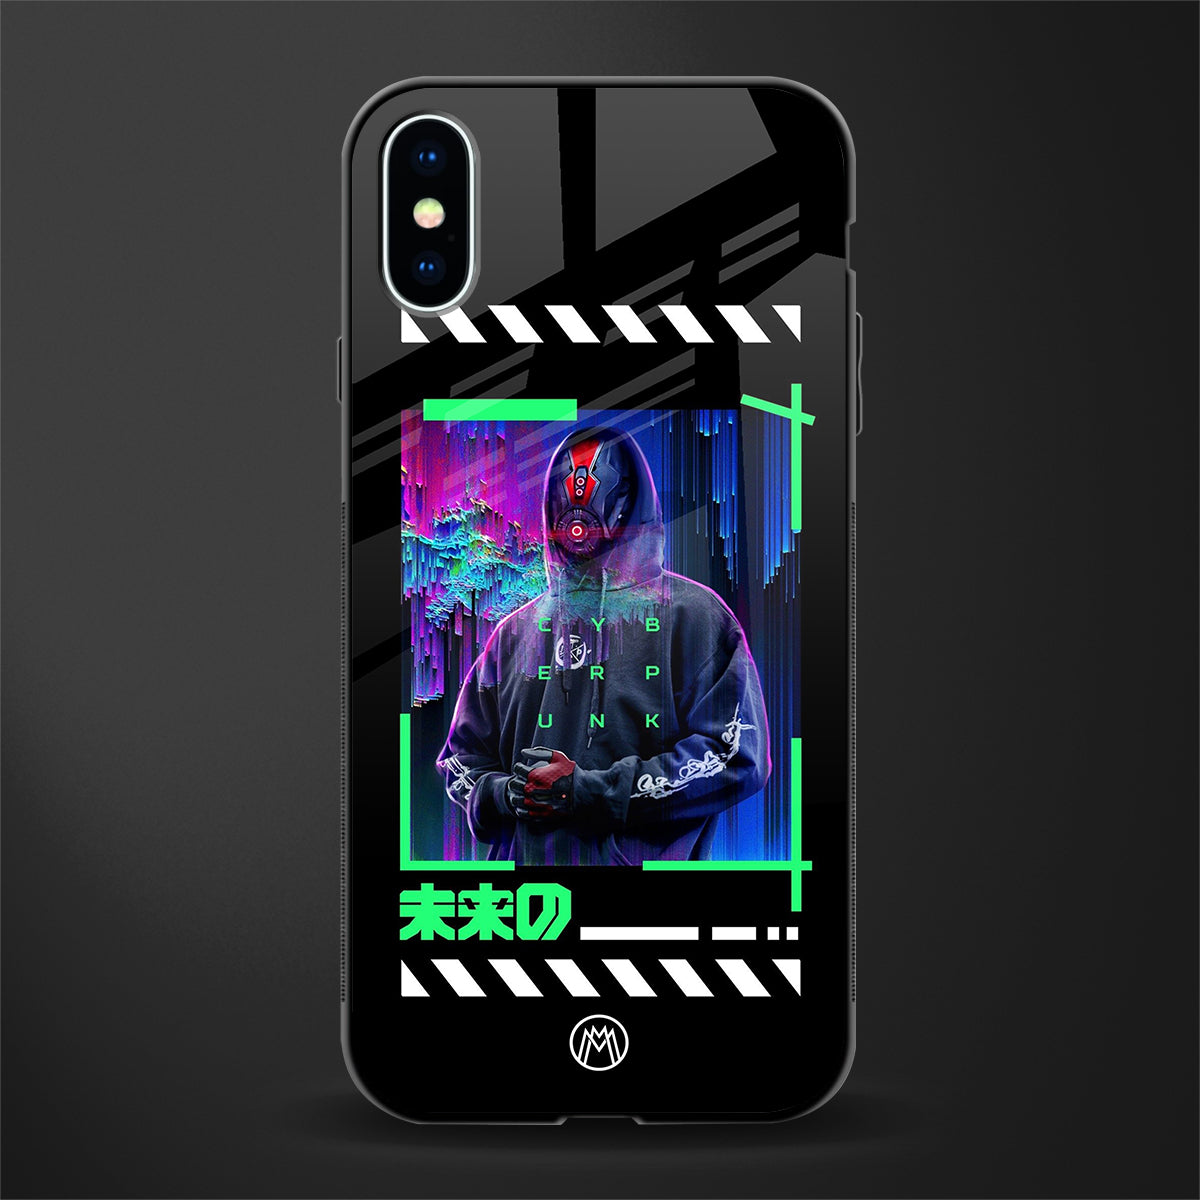 cyberpunk glass case for iphone x image